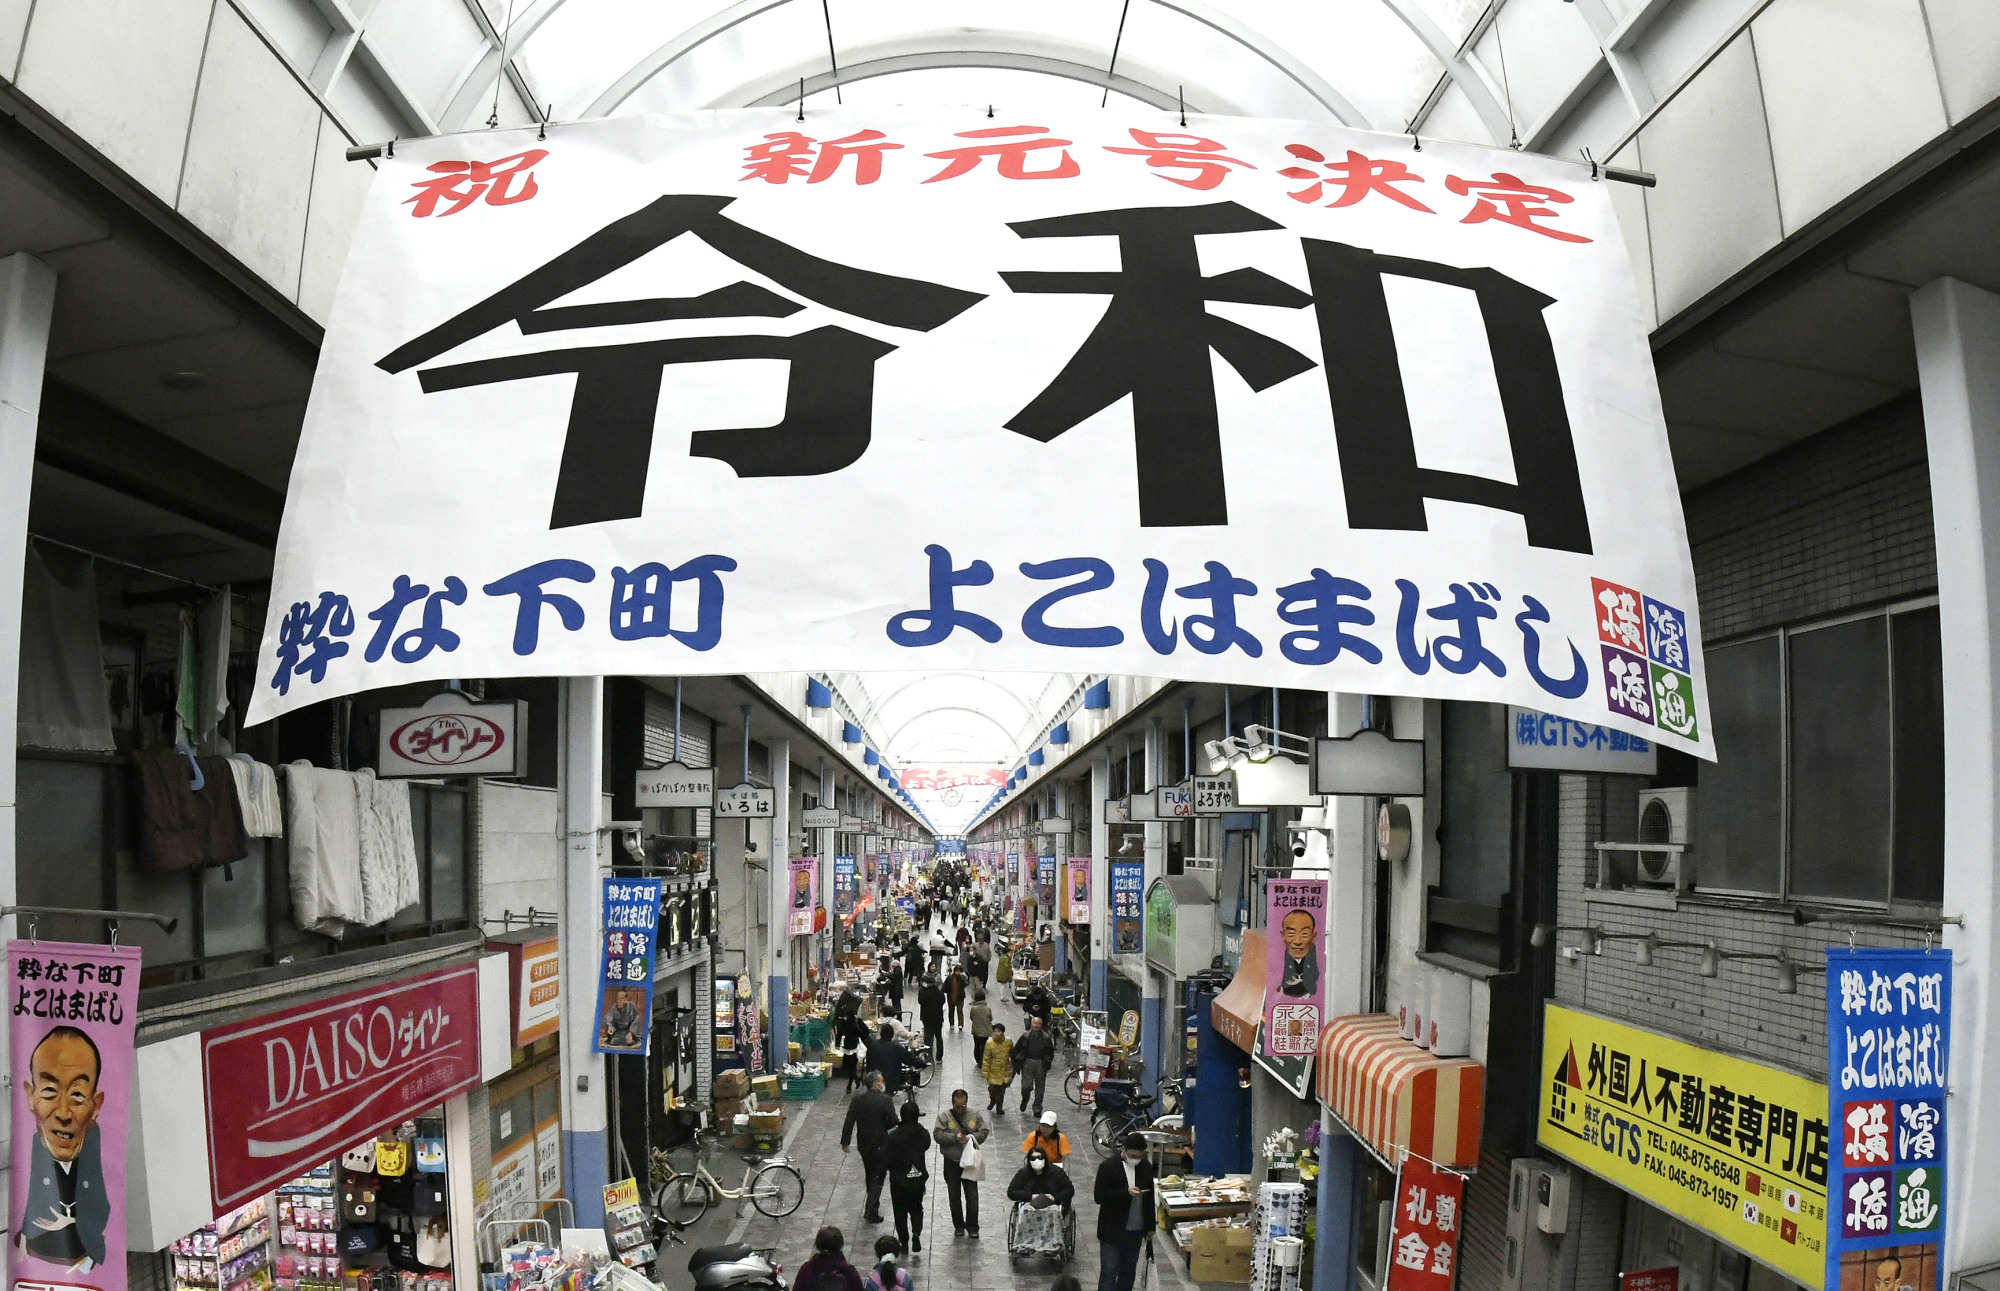 A banner showing Reiwa, the name of Japan's forthcoming new Imperial era, is seen hanging in a shopping arcade in Yokohama on Tuesday. | KYODO